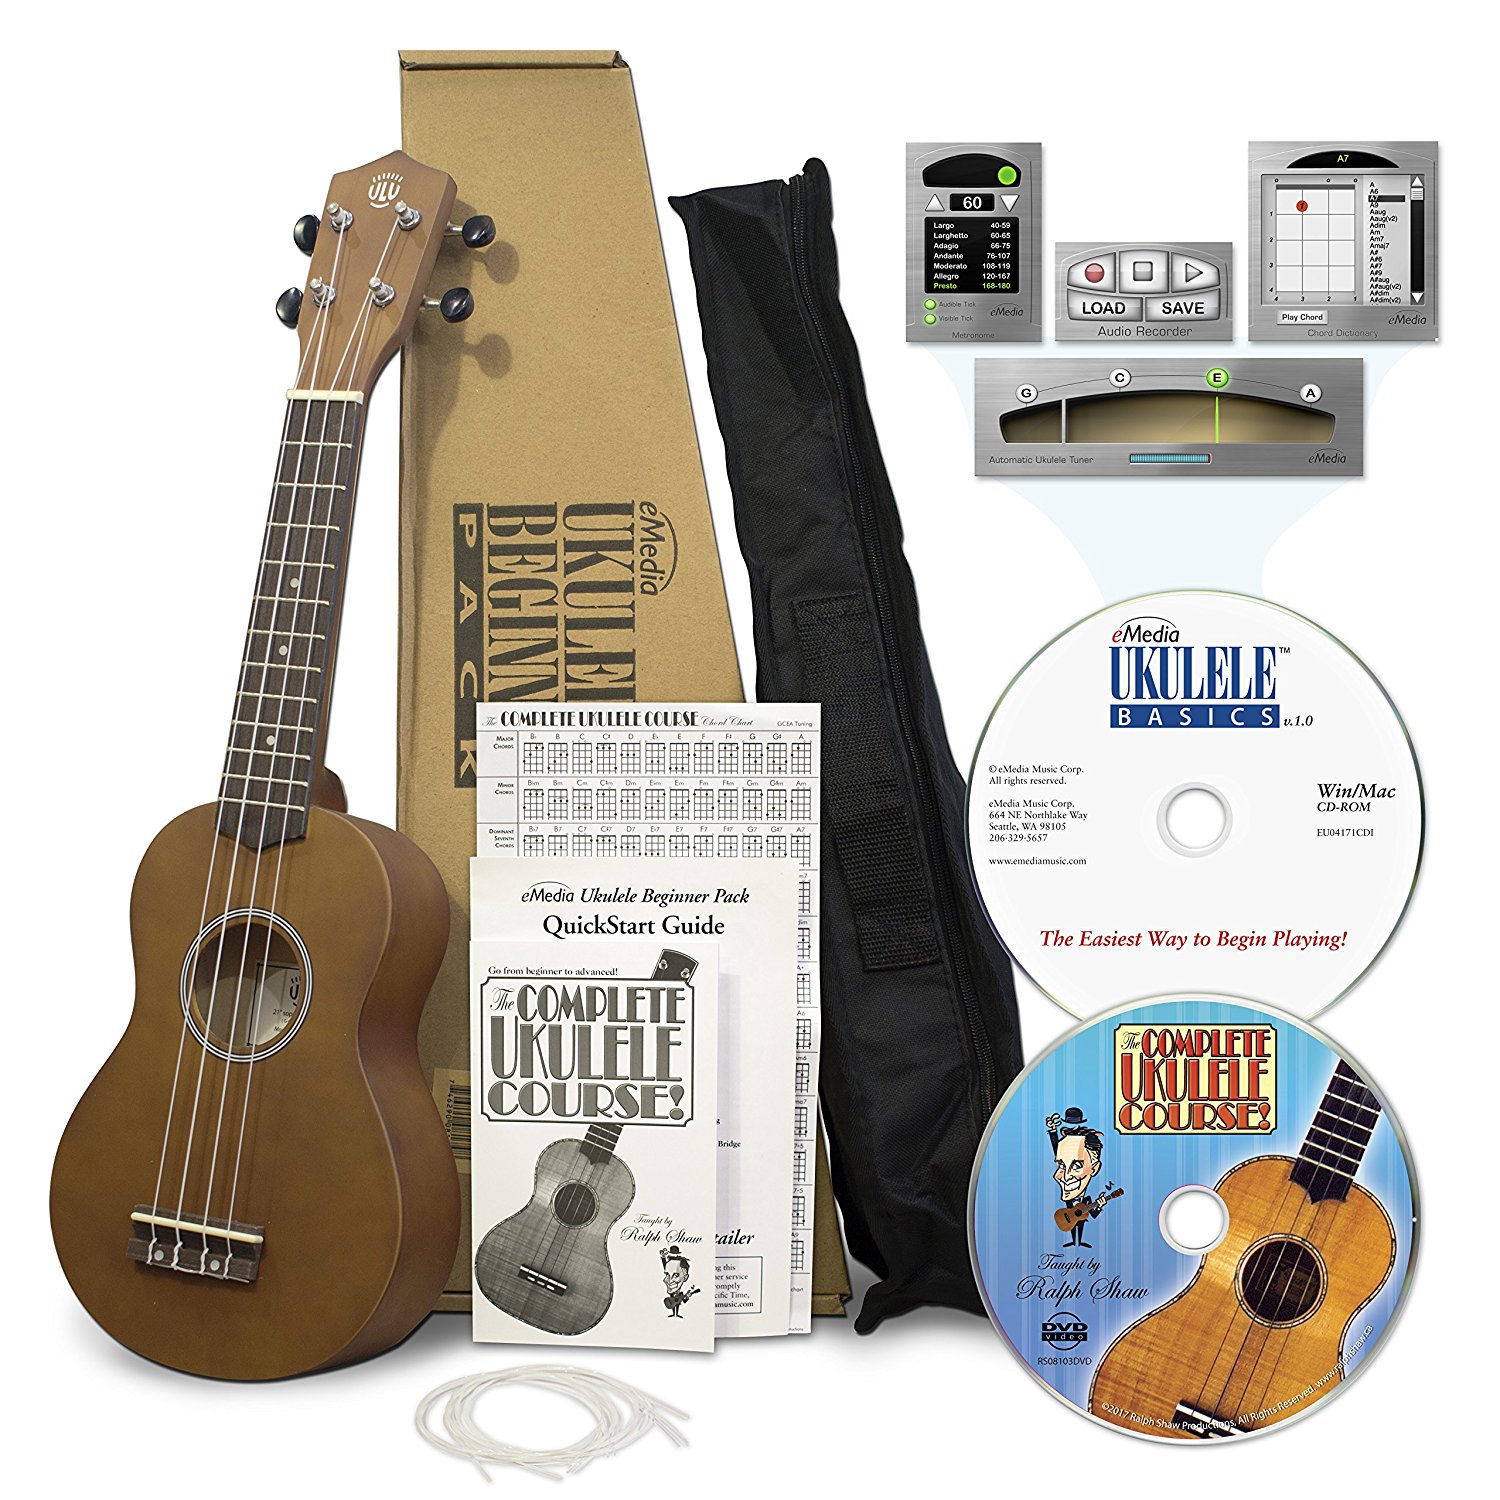 Select Musical Instruments and Accessories Starting At $27.99 (reg. $39